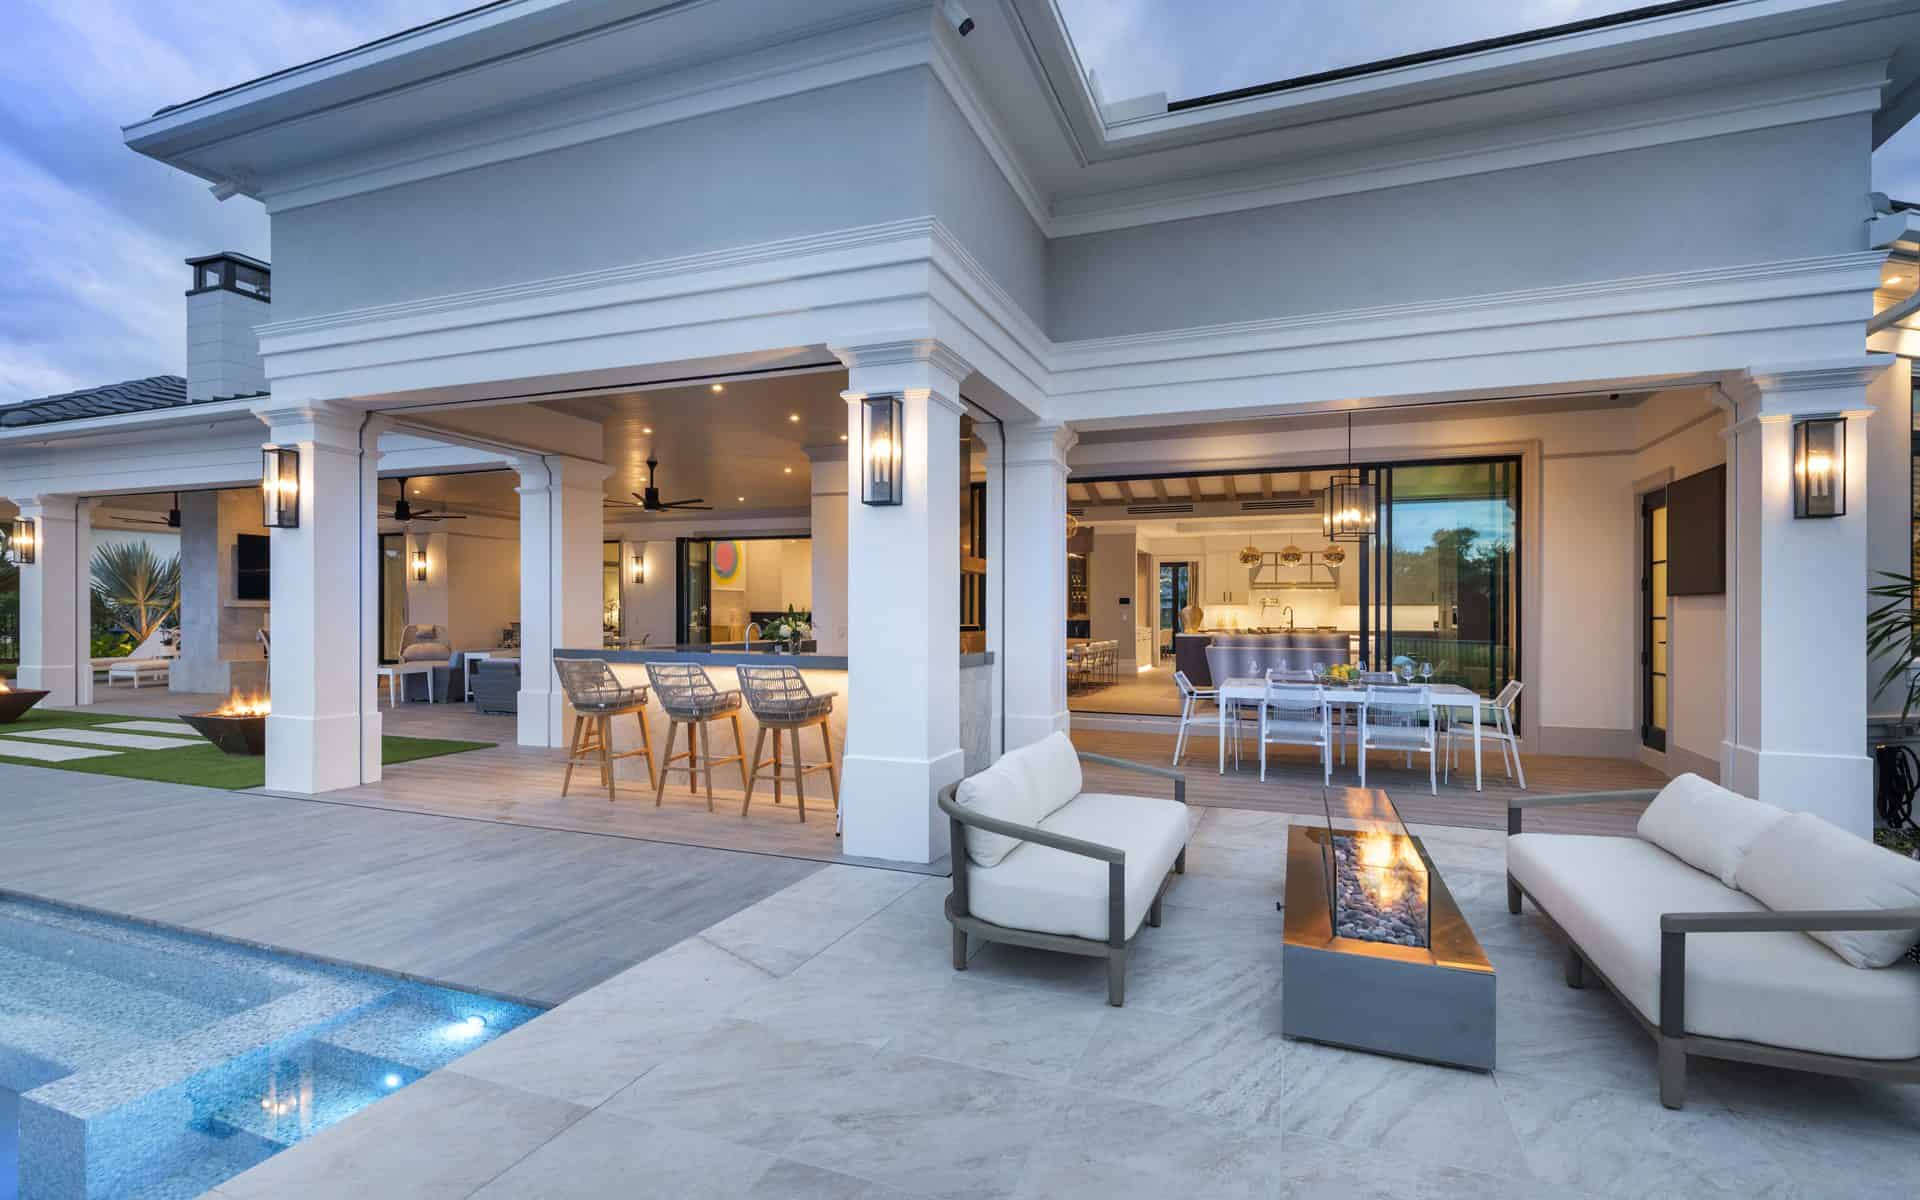 Stunning poolside patio features modern furniture and fire table, custom bar and custom eating area.